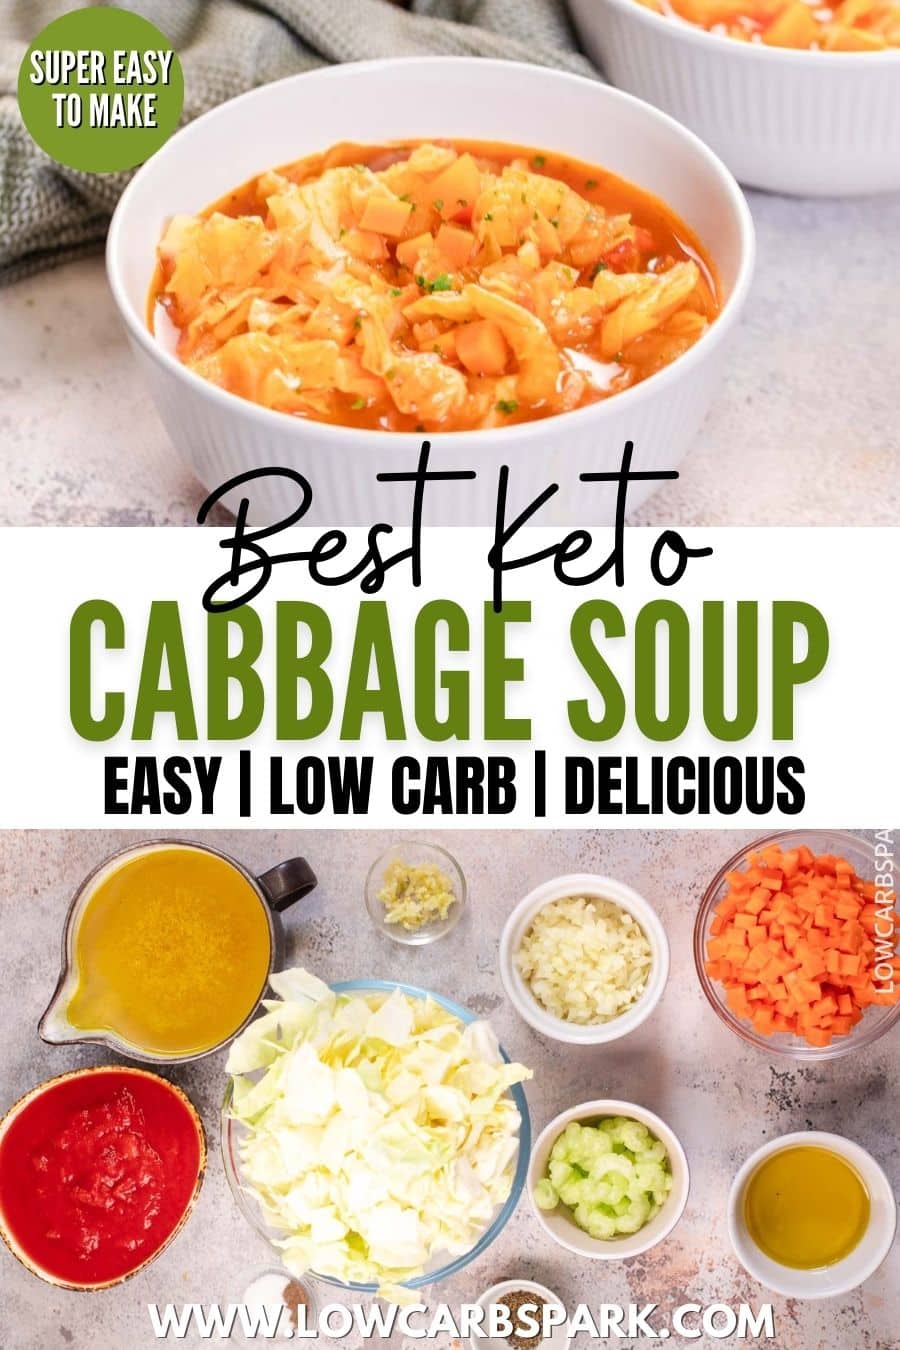 Easy Cabbage Soup - Weight Loss Cabbage Soup